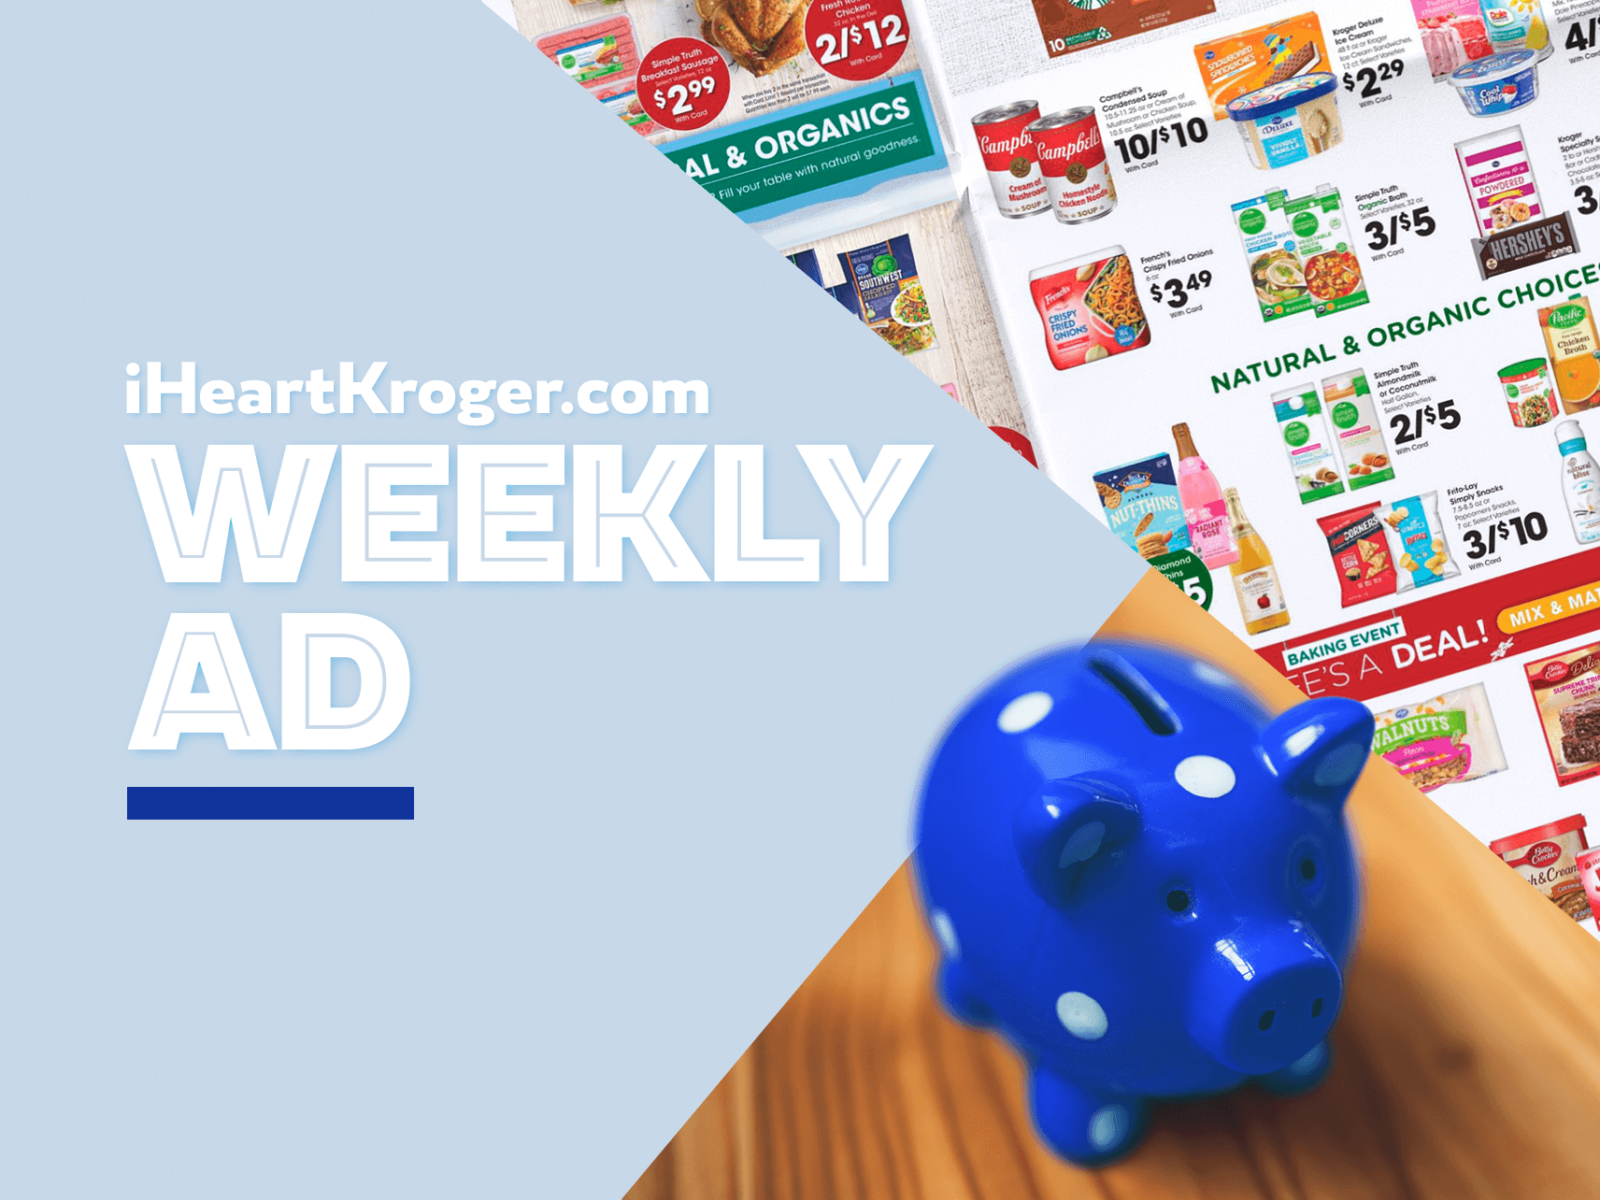 Kroger Ad & Coupons Week Of 1/12 to 1/18 1